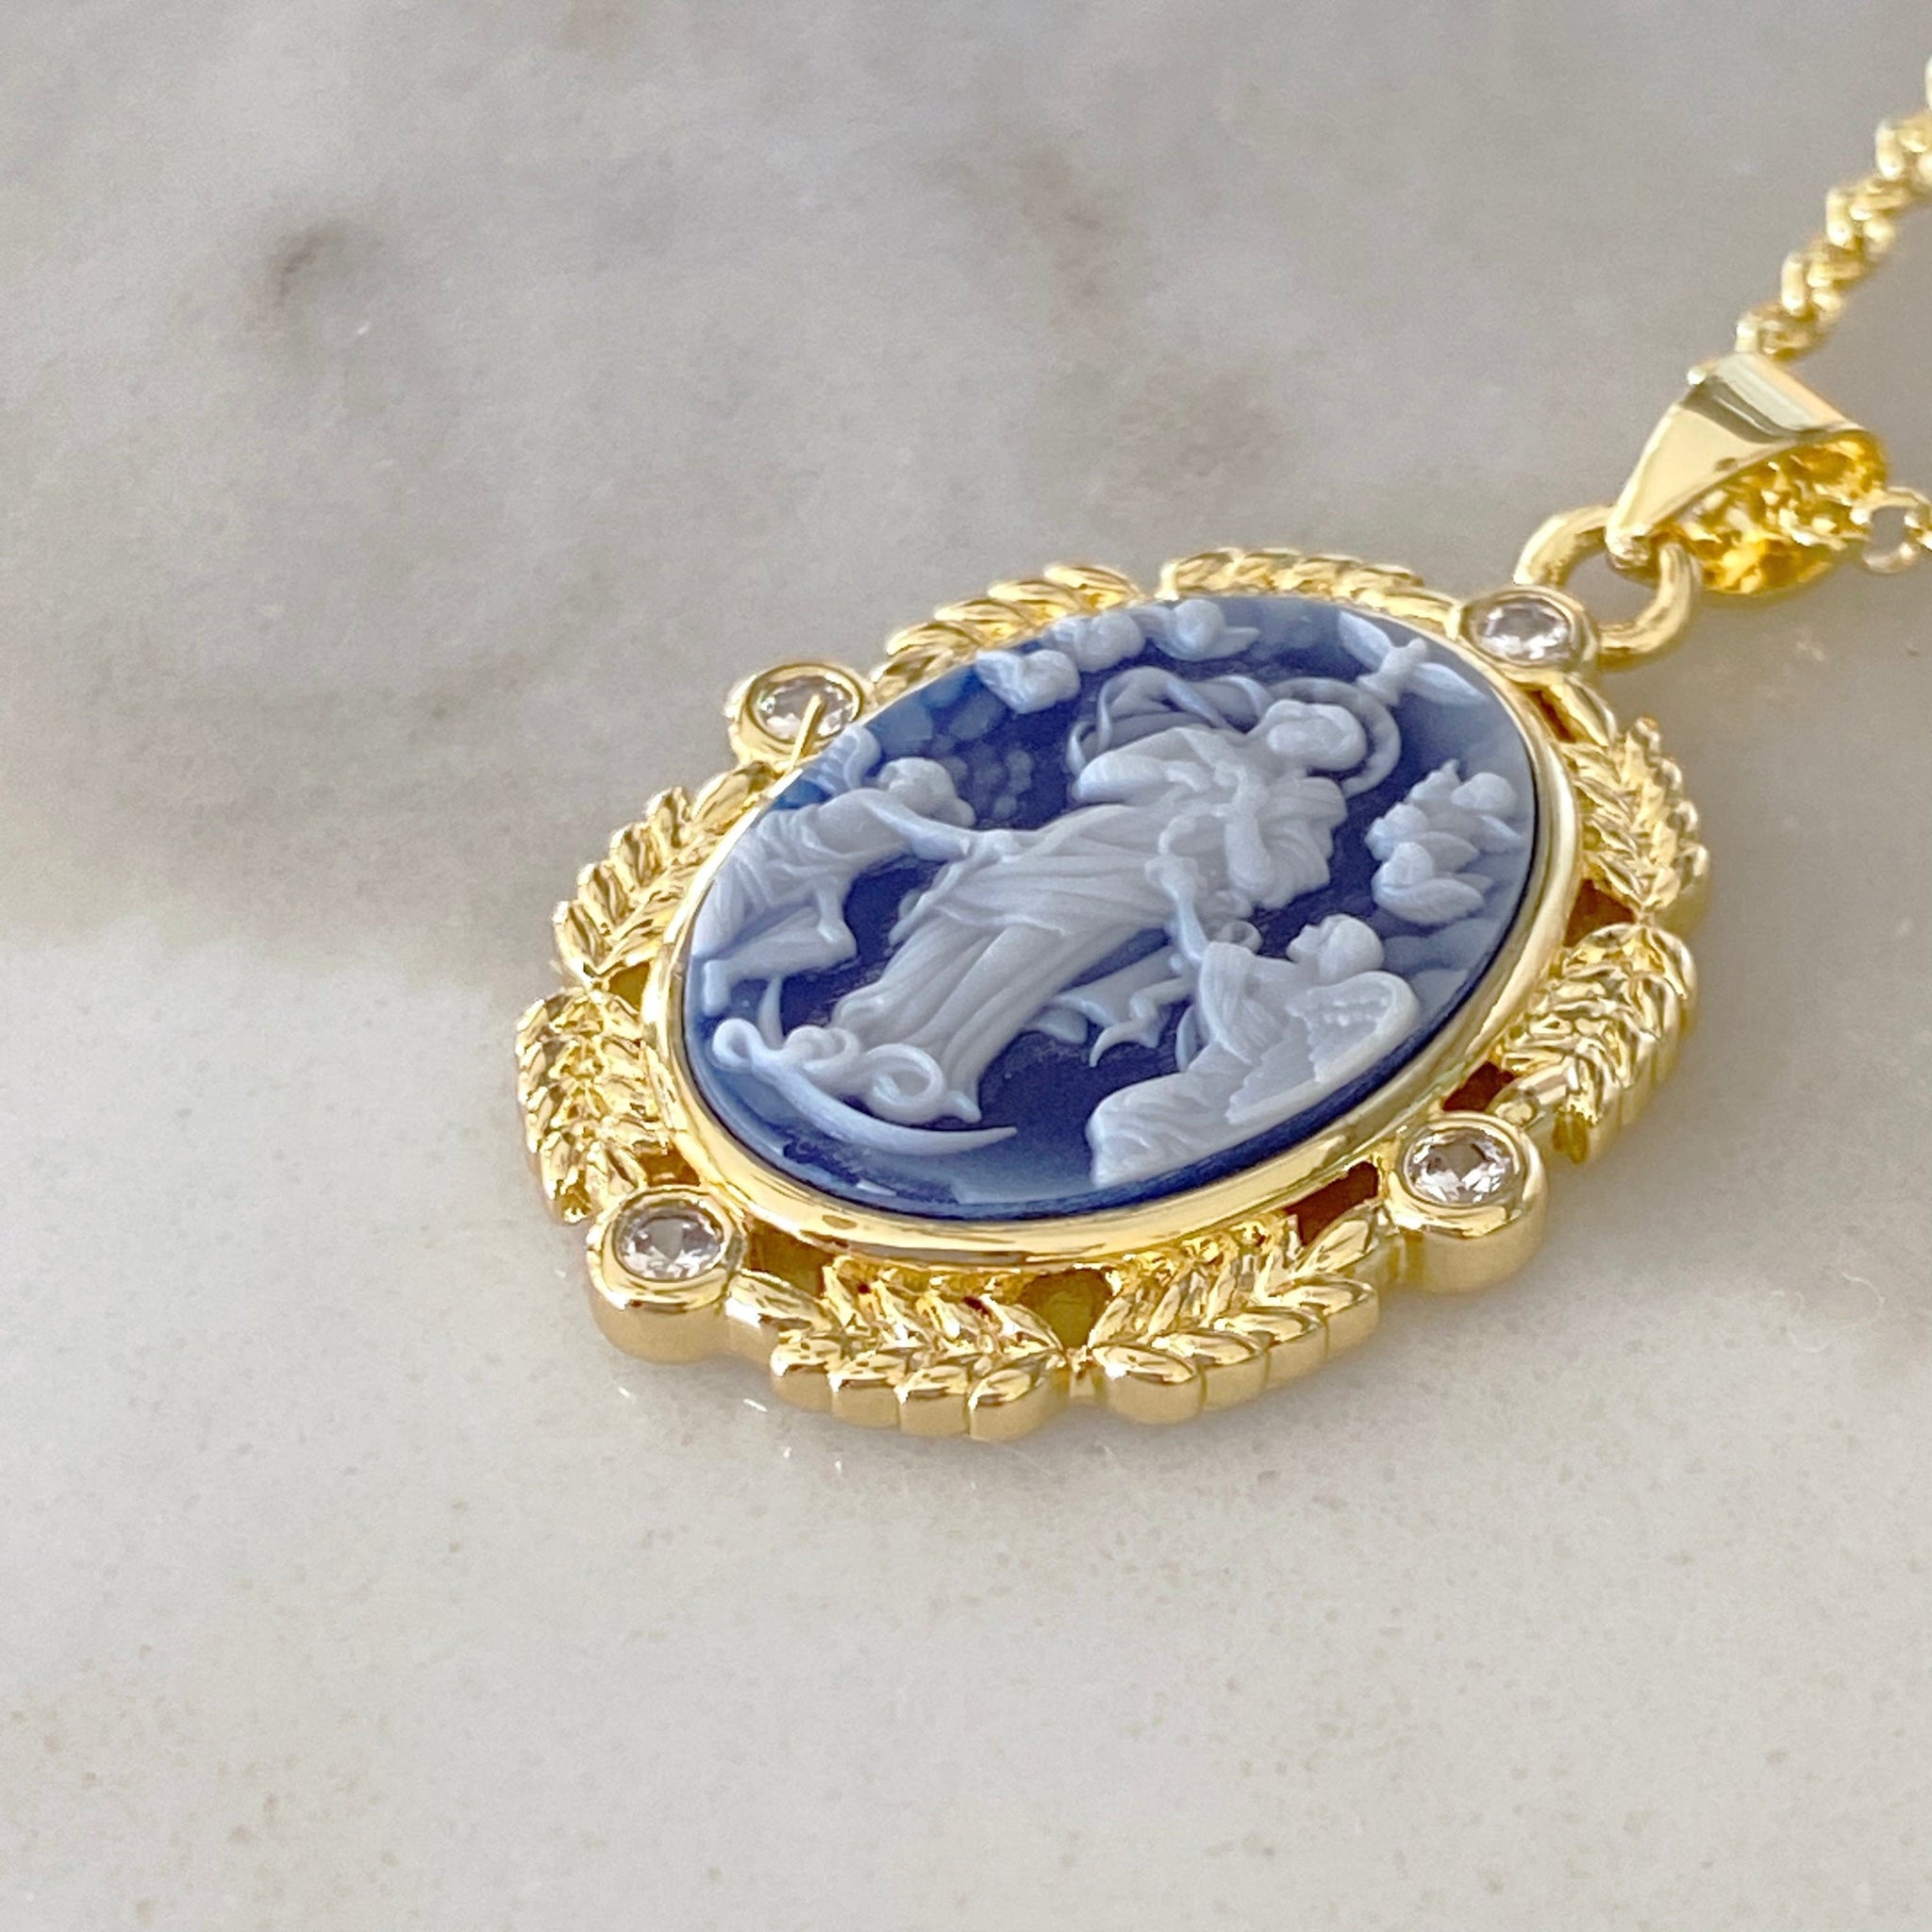 Angelic Blue Agate Cameo Necklace